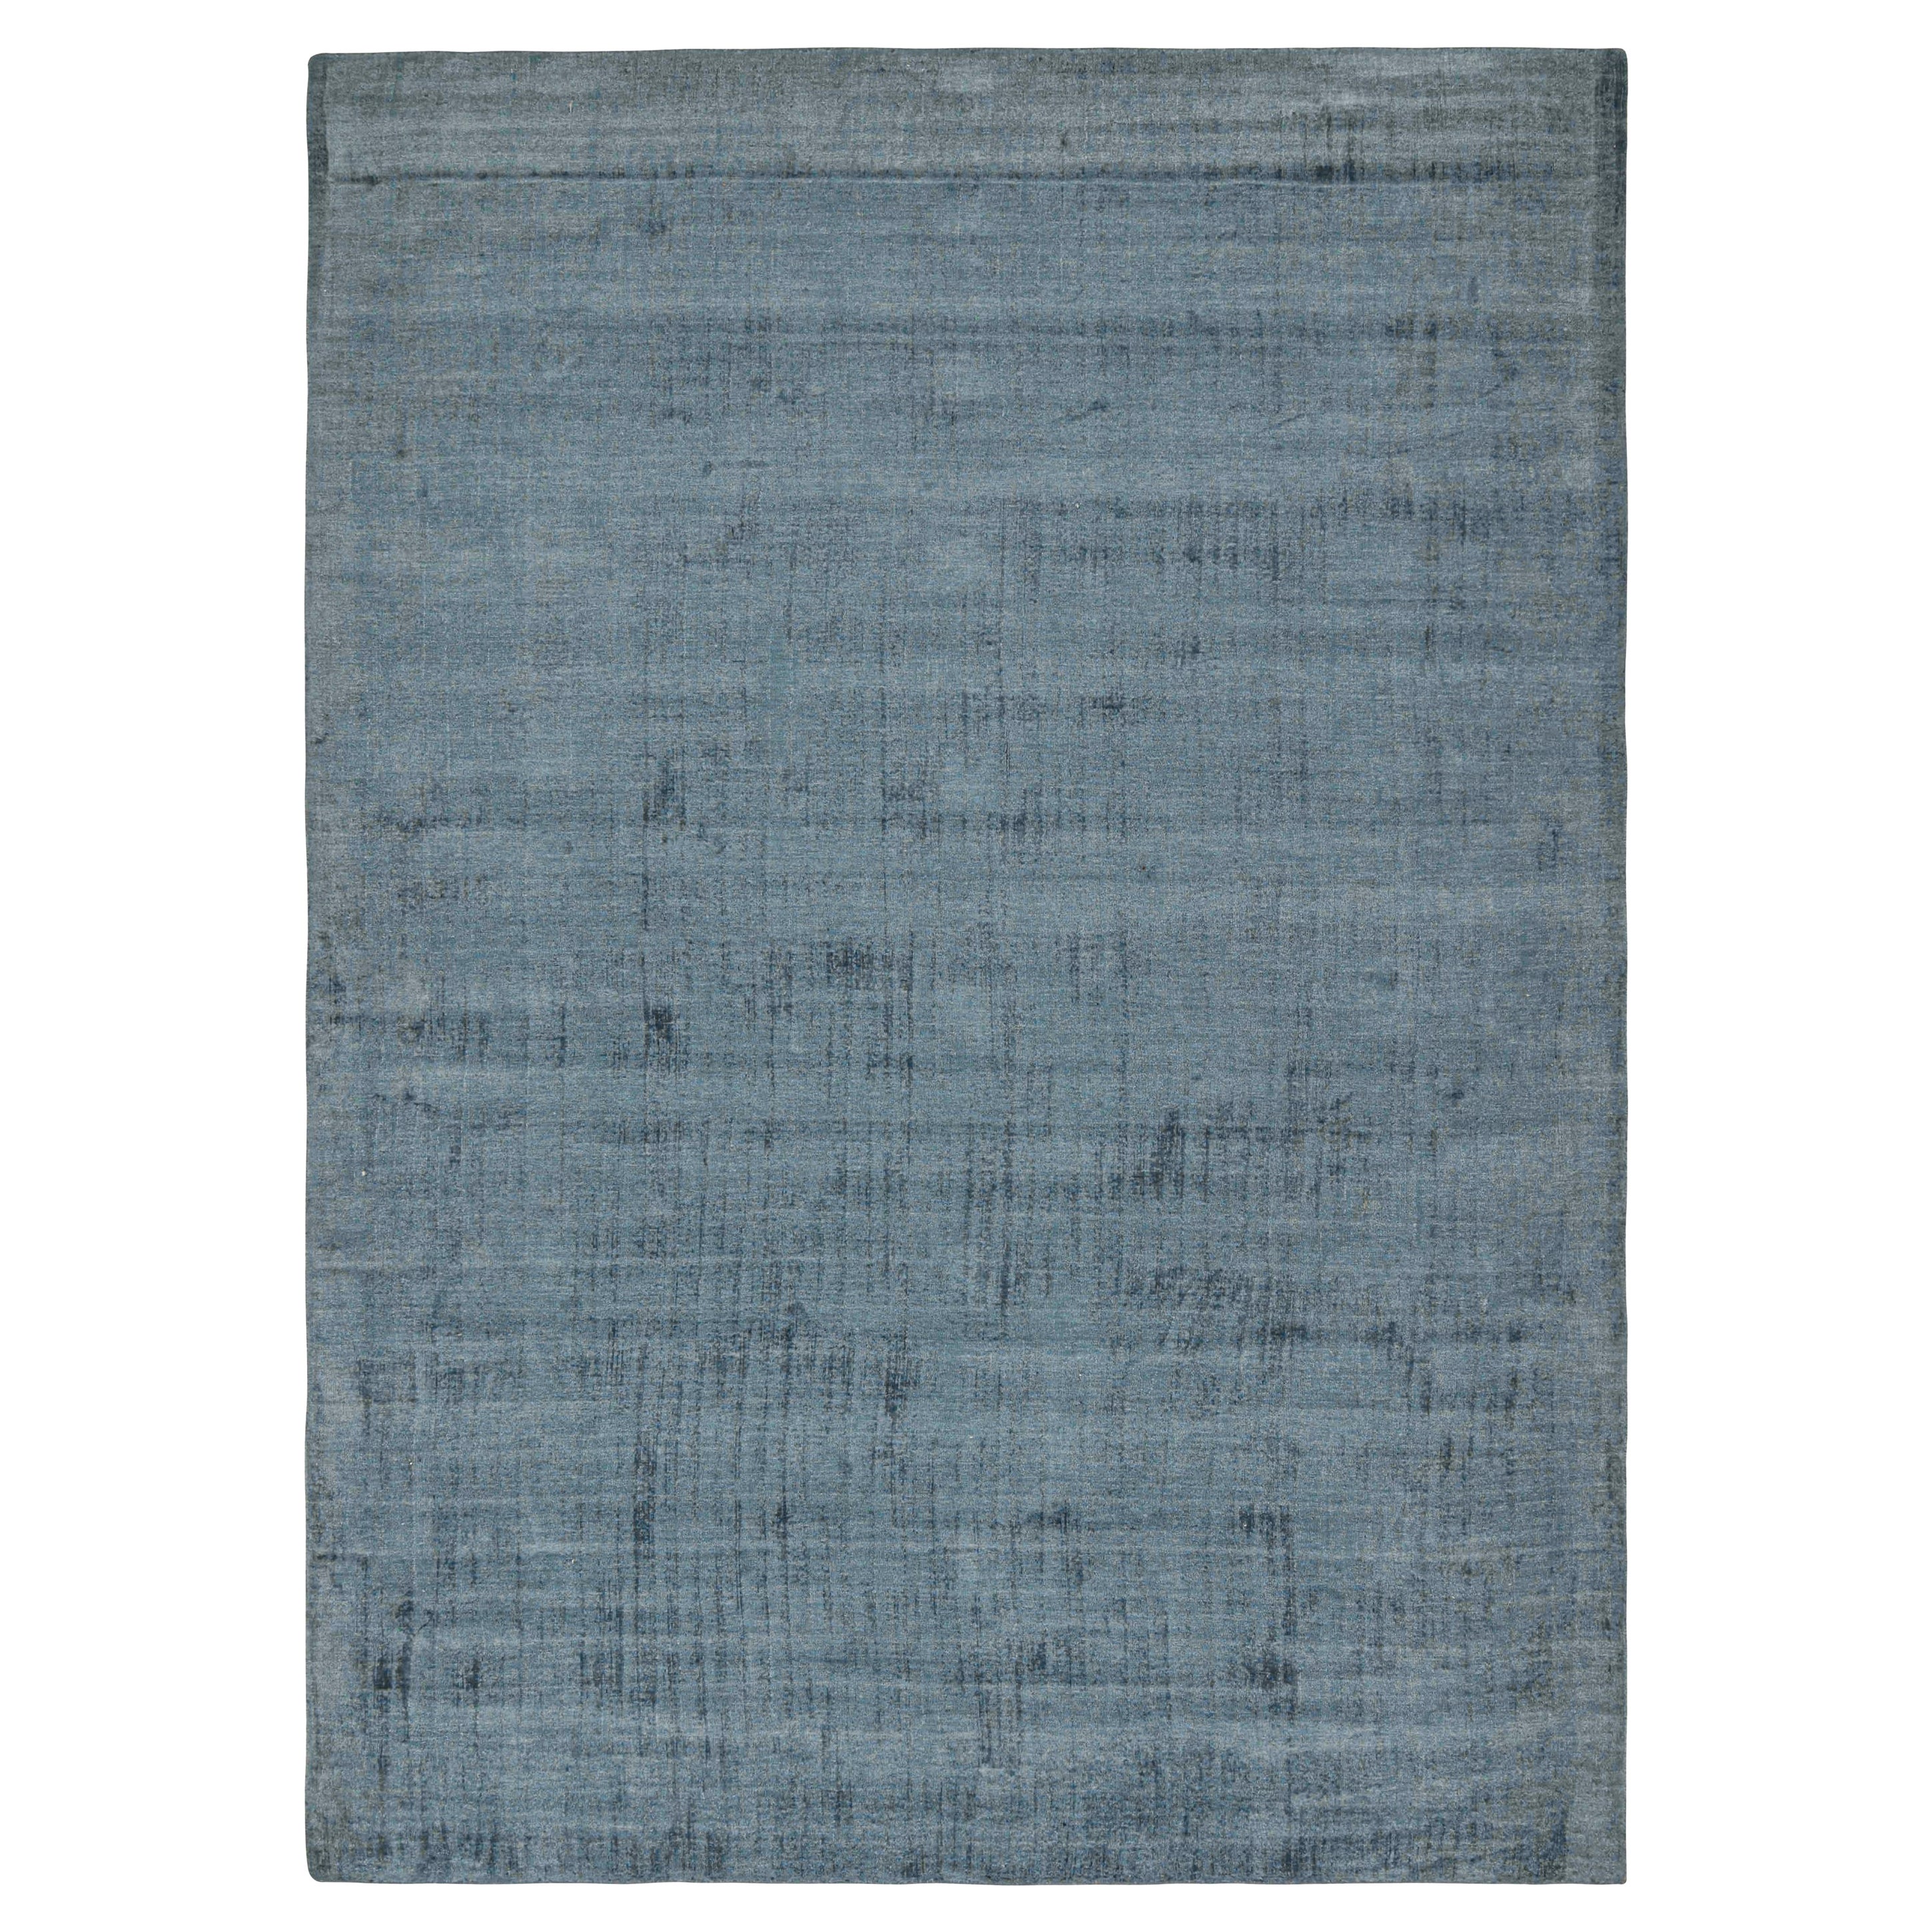 This 10x14 rug is a grand new entry to Rug & Kilim’s Texture of Color Collection. 

Connoisseurs will note this piece is from our new Light on Loom line, which includes quicker custom capabilities than ever before. This piece and others like it